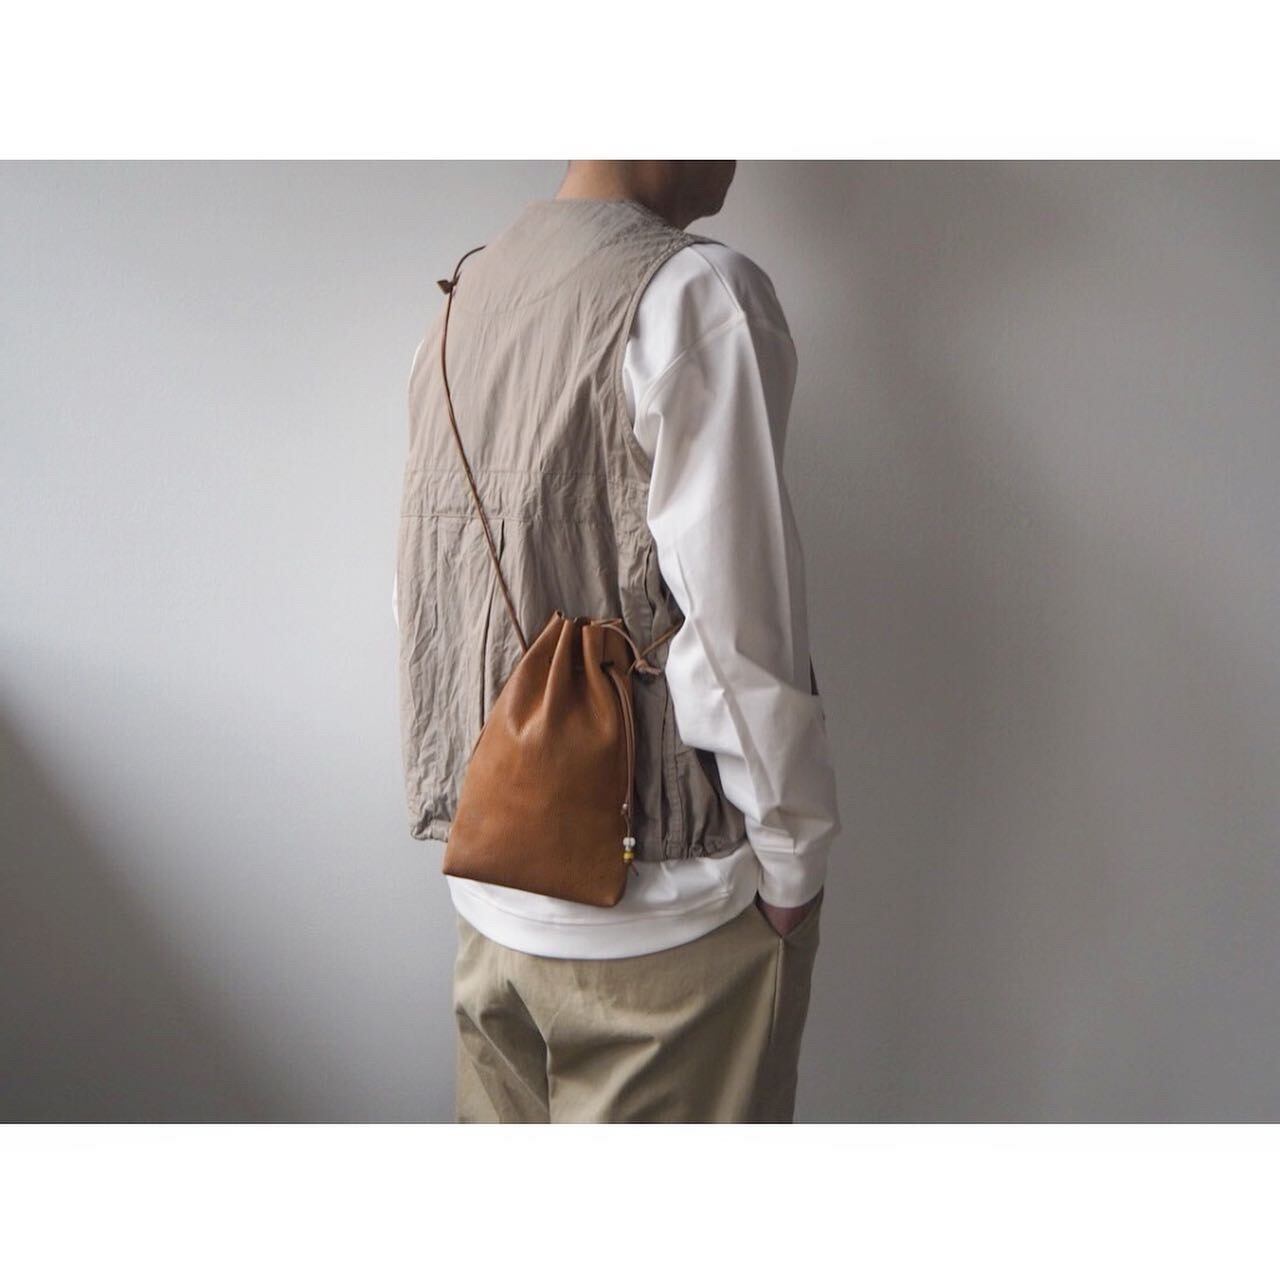 SLOW(スロウ) 『DEER』 2Way Draw String Shoulder | AUTHENTIC Life Store powered  by BASE